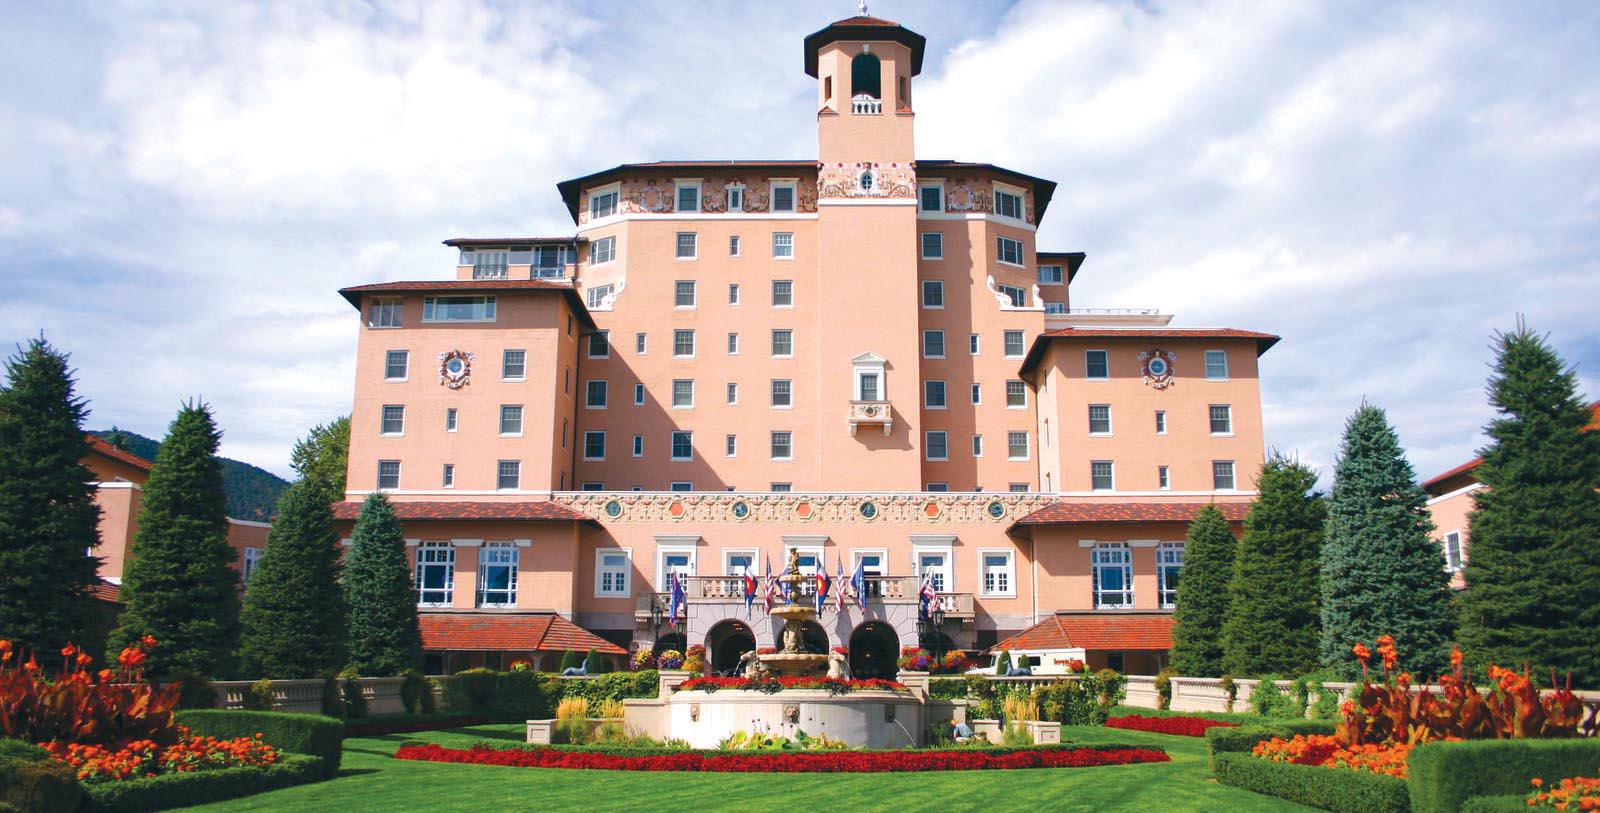 Image of Entrance The Broadmoor, 1918, Member of Historic Hotels of America, in Colorado Springs, Colorado, Overview